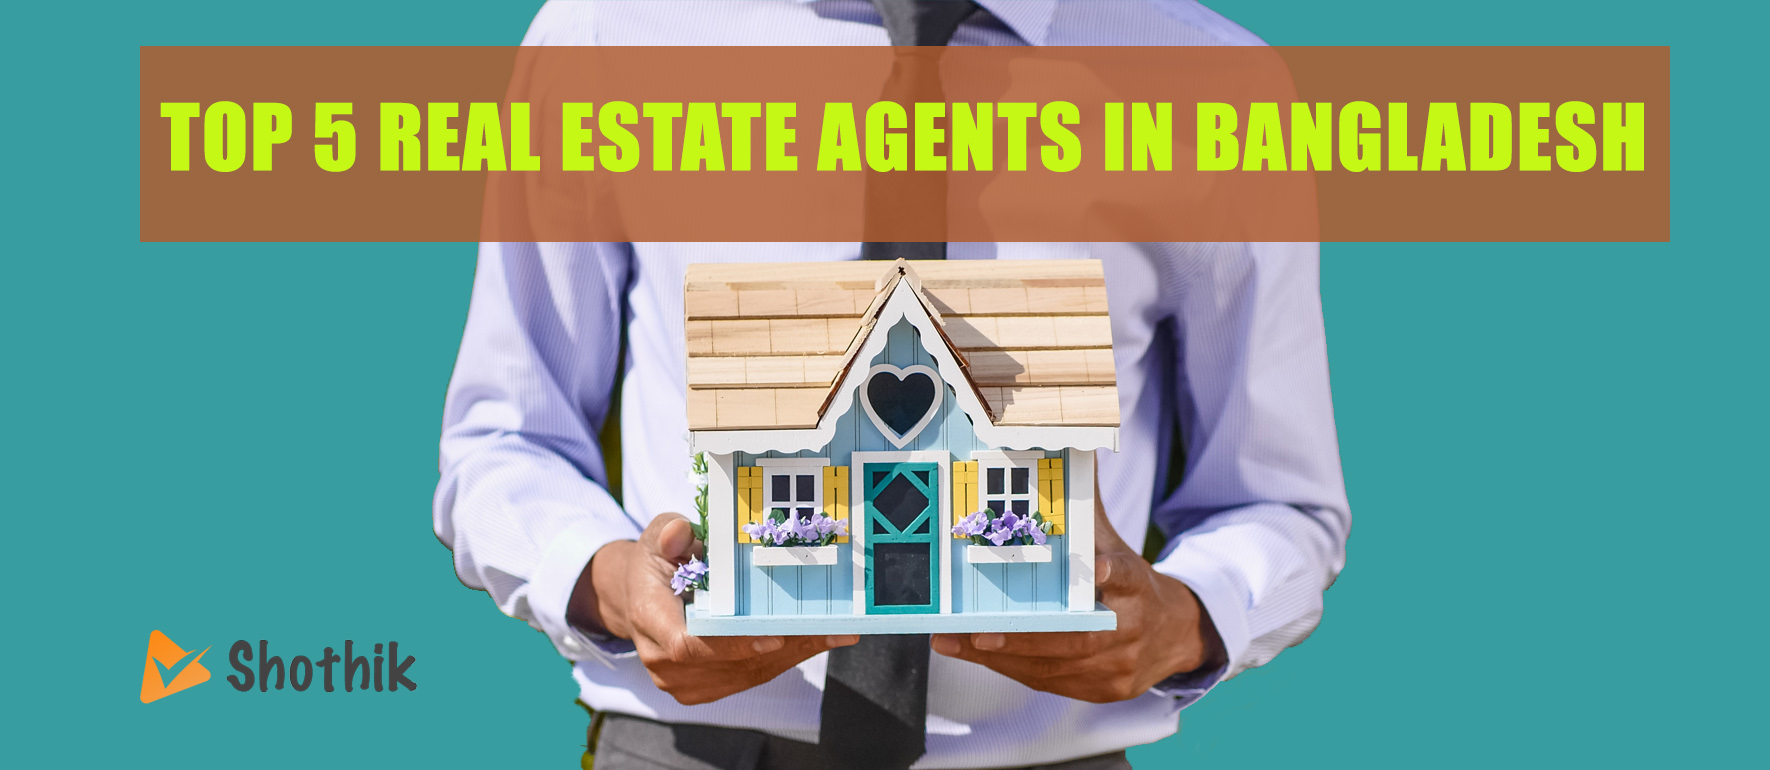 Top 5 Real Estate Agents in Bangladesh